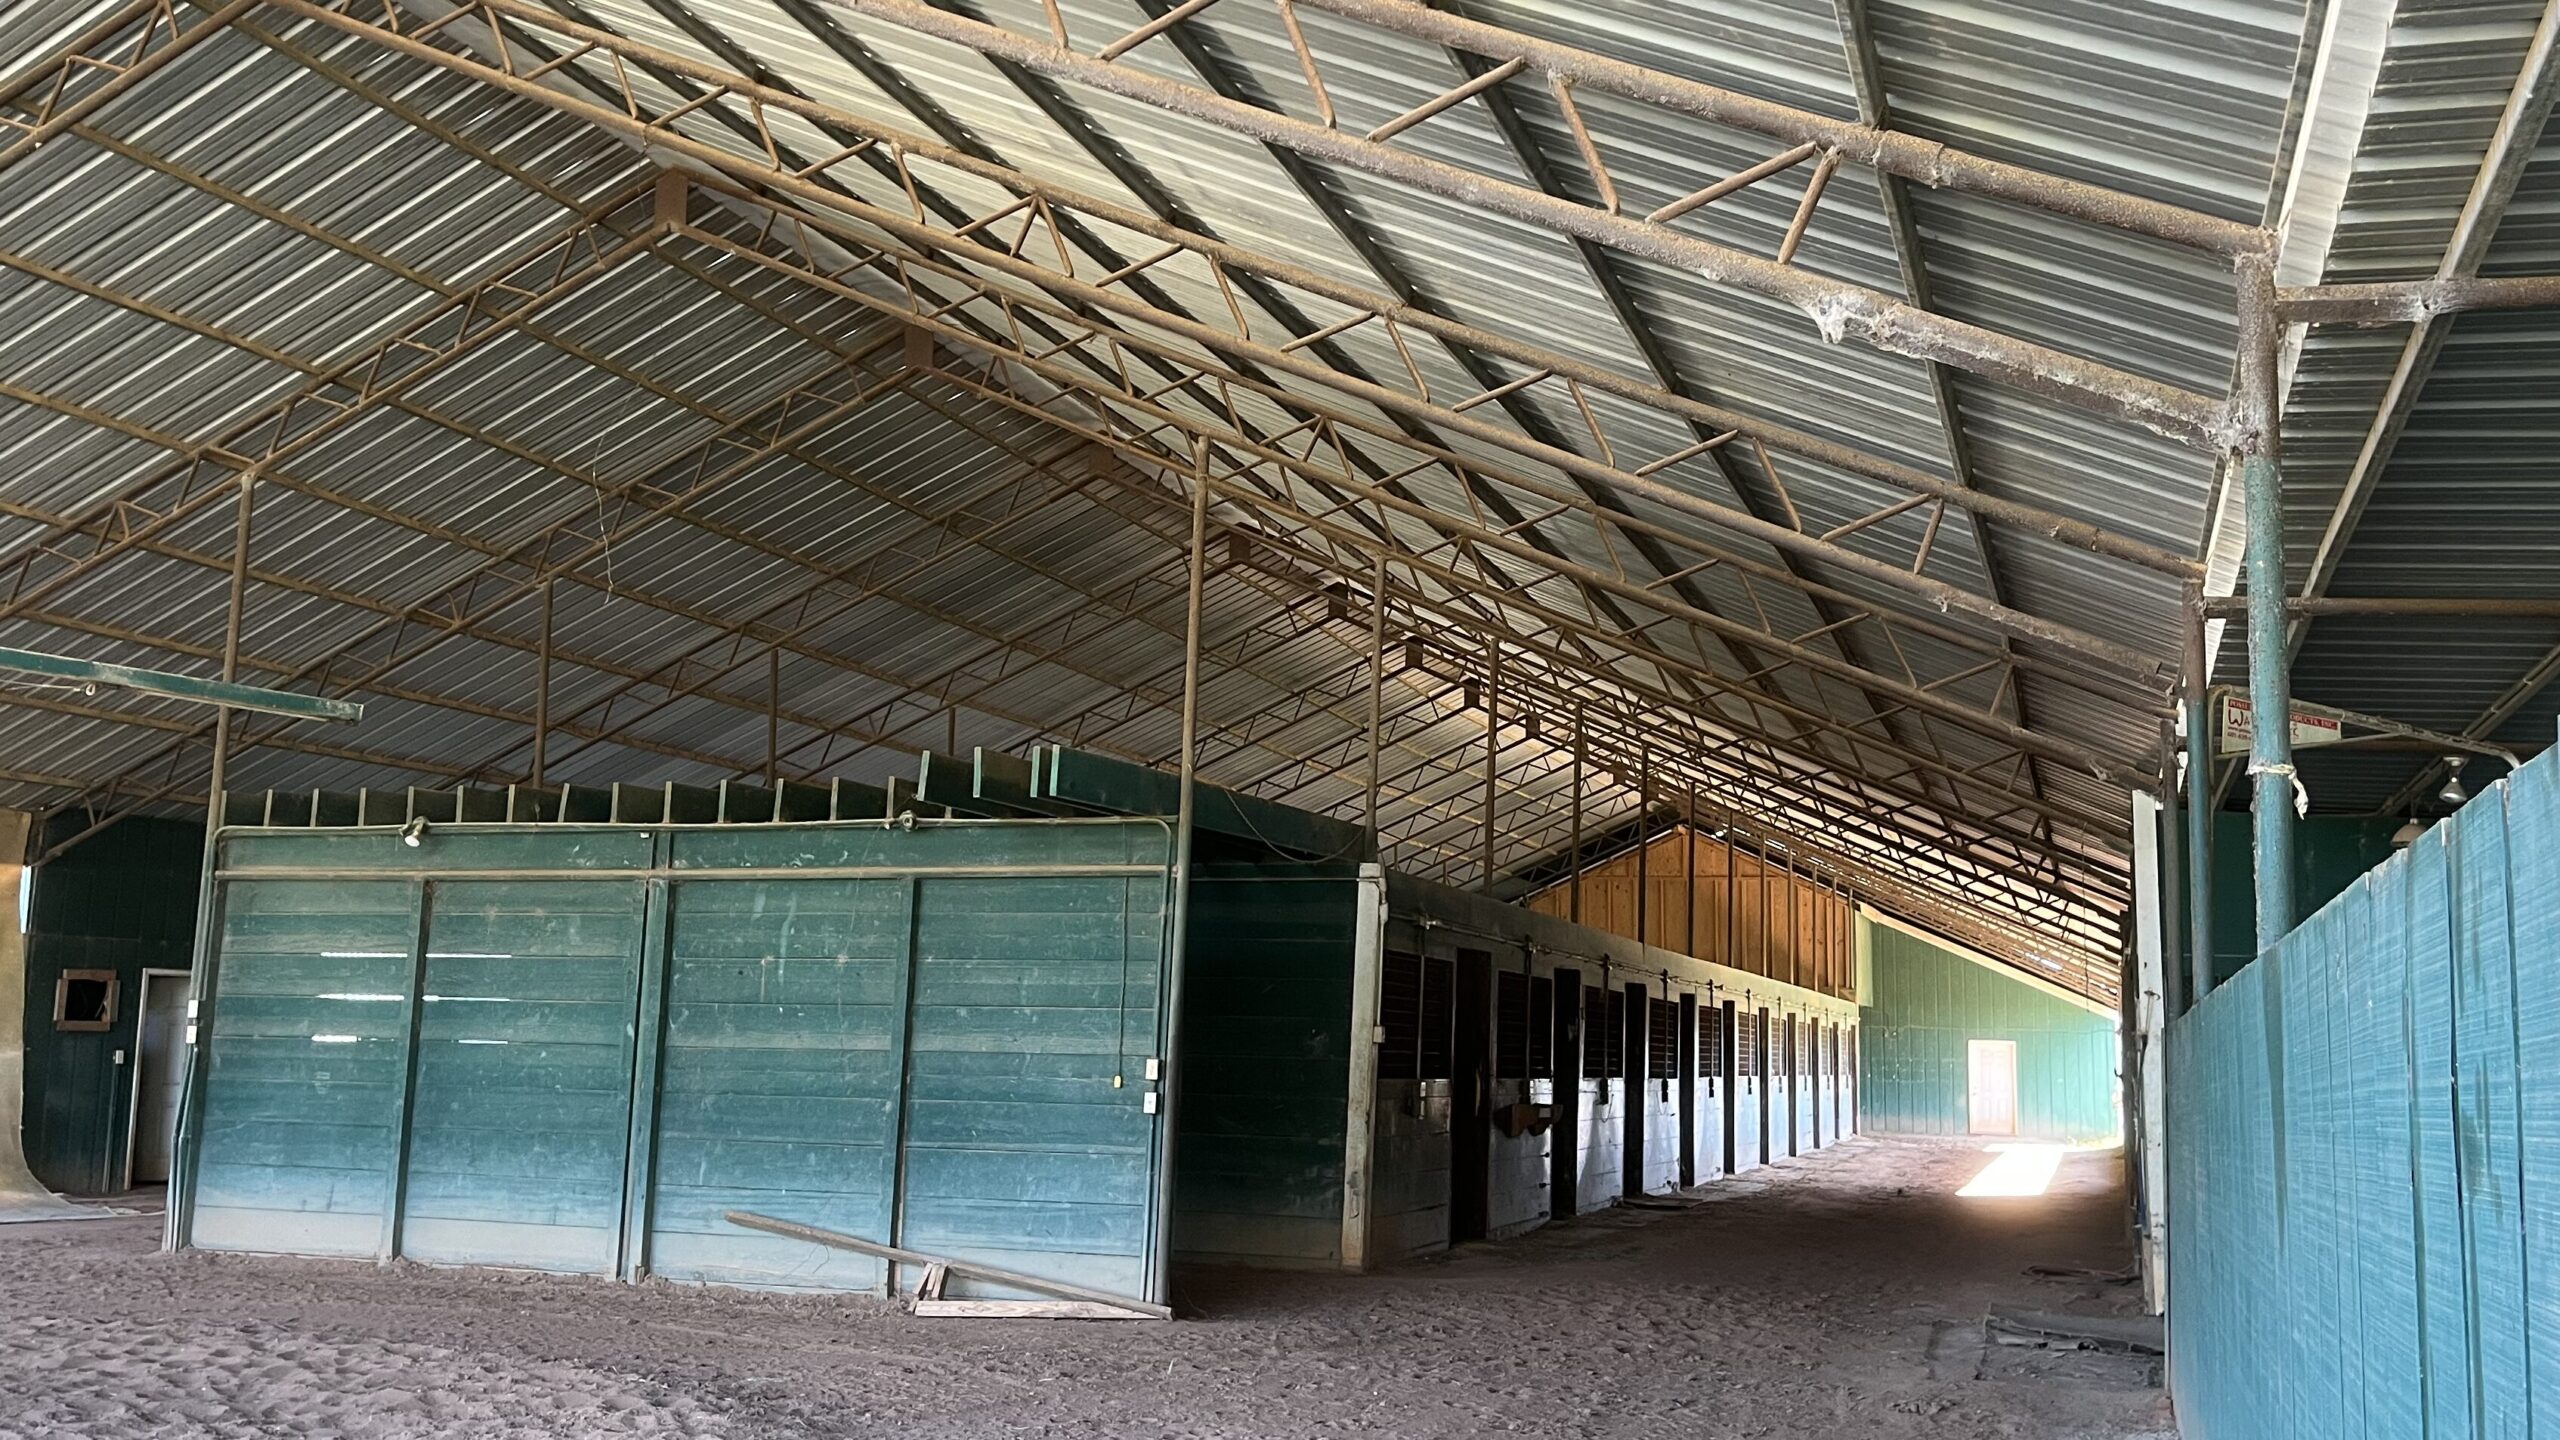 Picture of a horse barn with good ventilation.